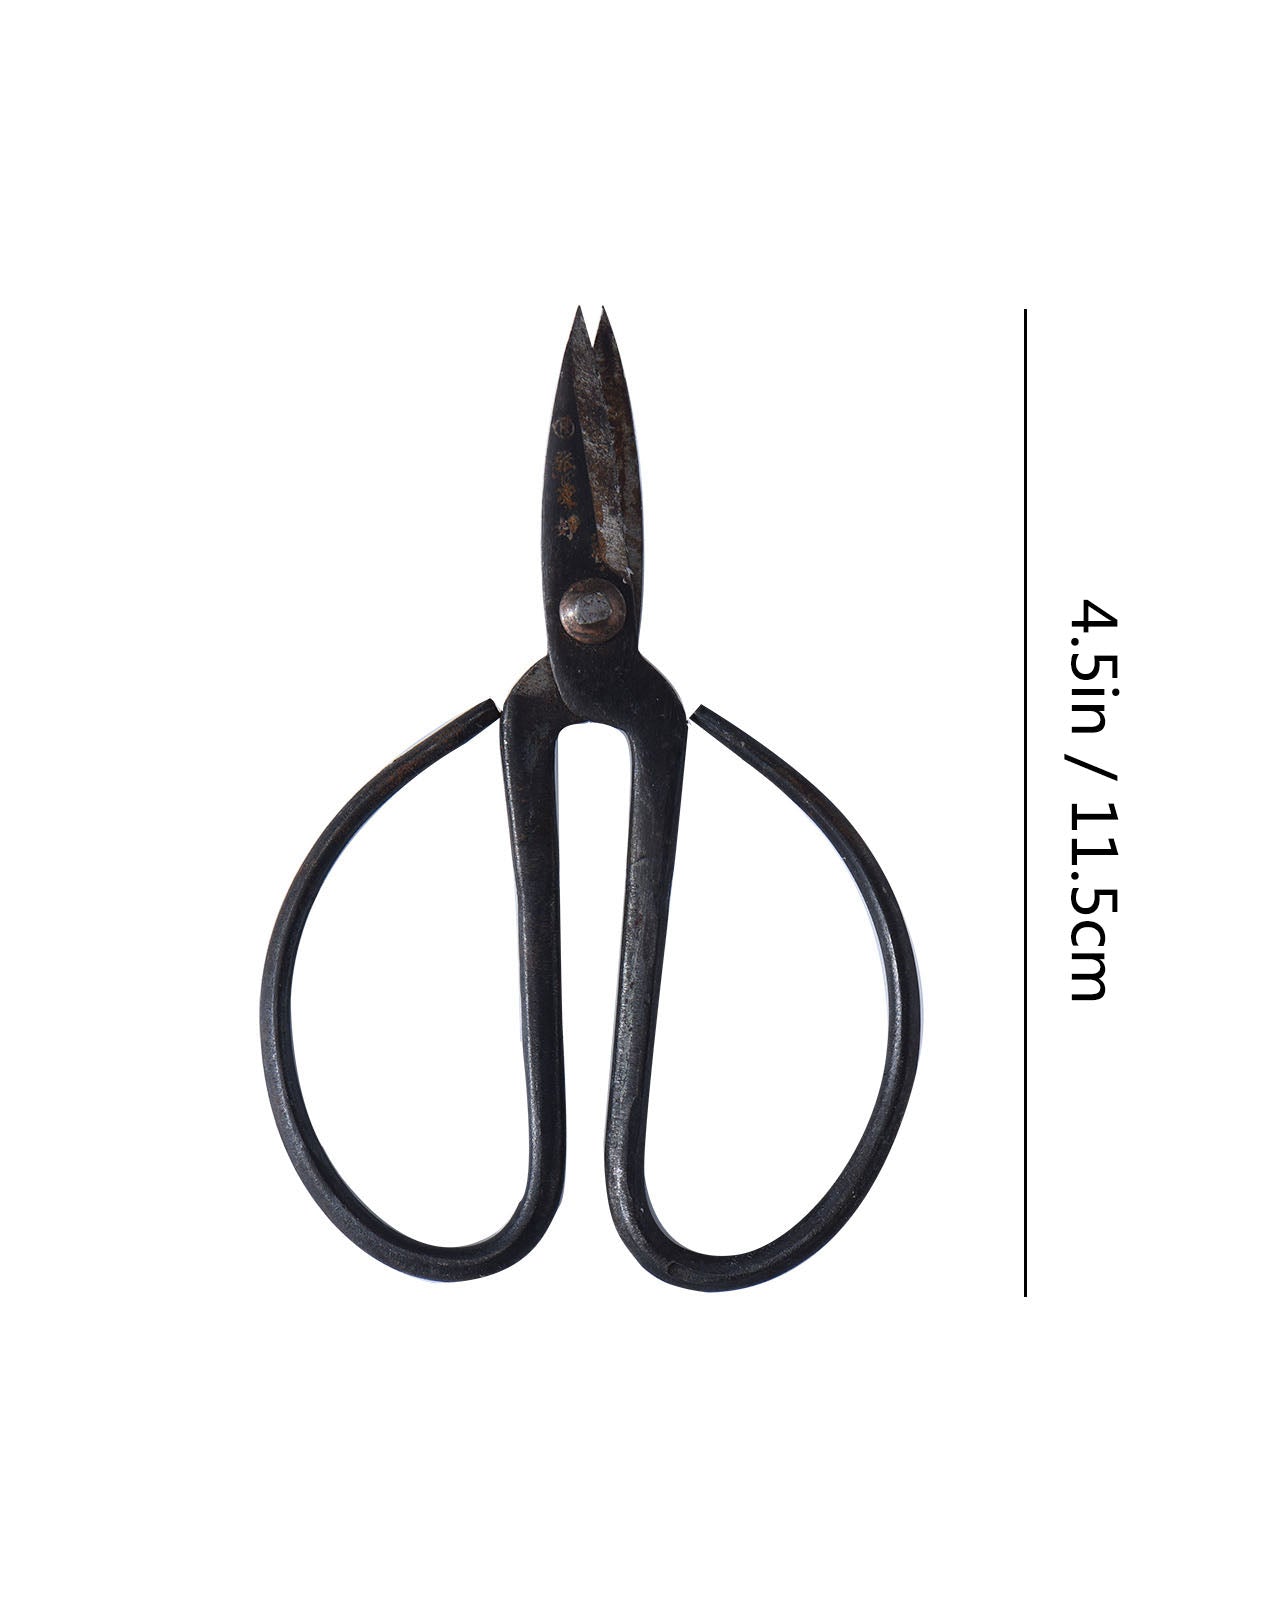 Vintage Metal Scissors 6 inches Tips Removed Black